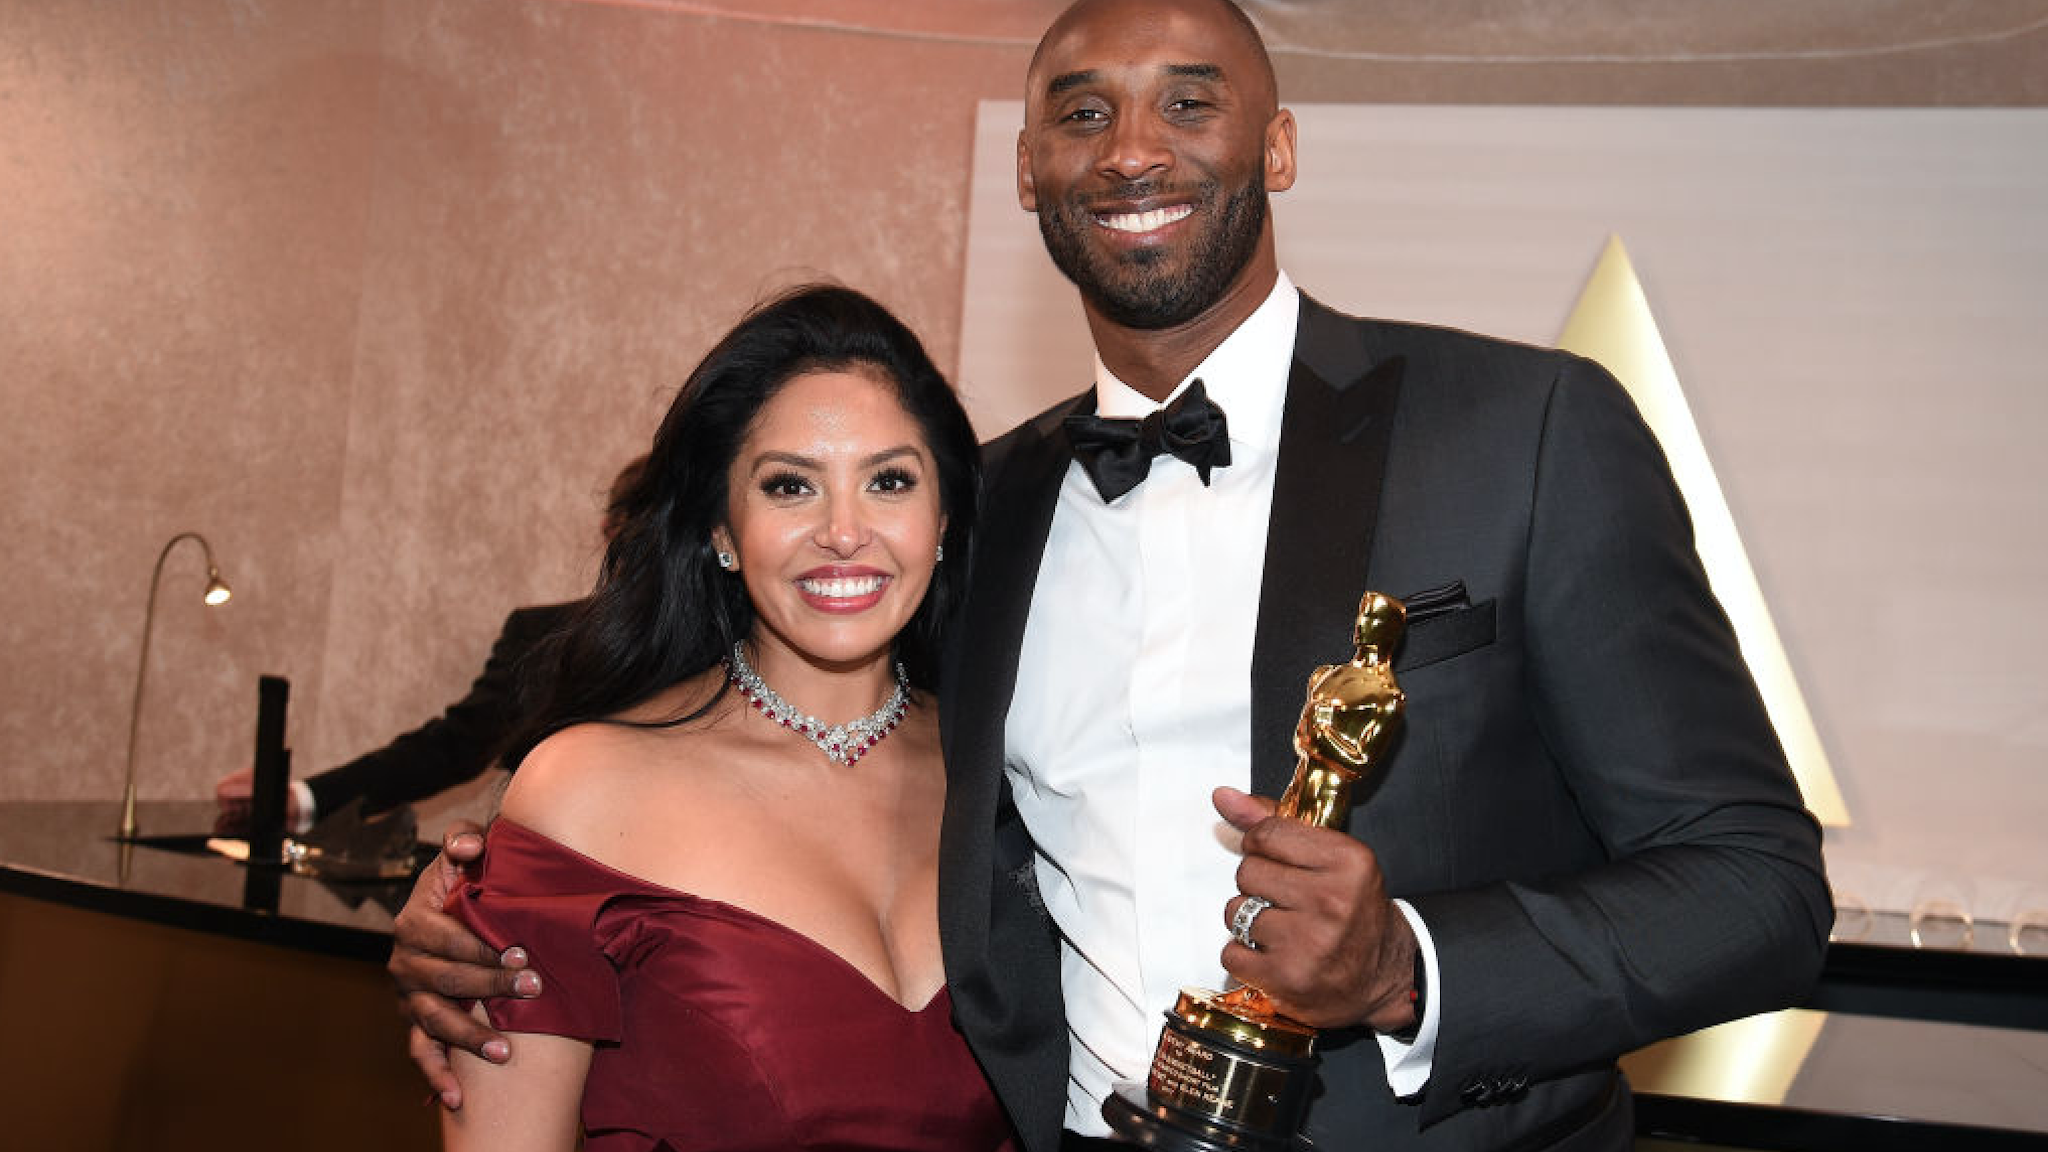 Kobe Bryant (R) and Vanessa Laine Bryant attend the 90th Annual Academy Awards Governors Ball at Hollywood & Highland Center on March 4, 2018 in Hollywood, California.